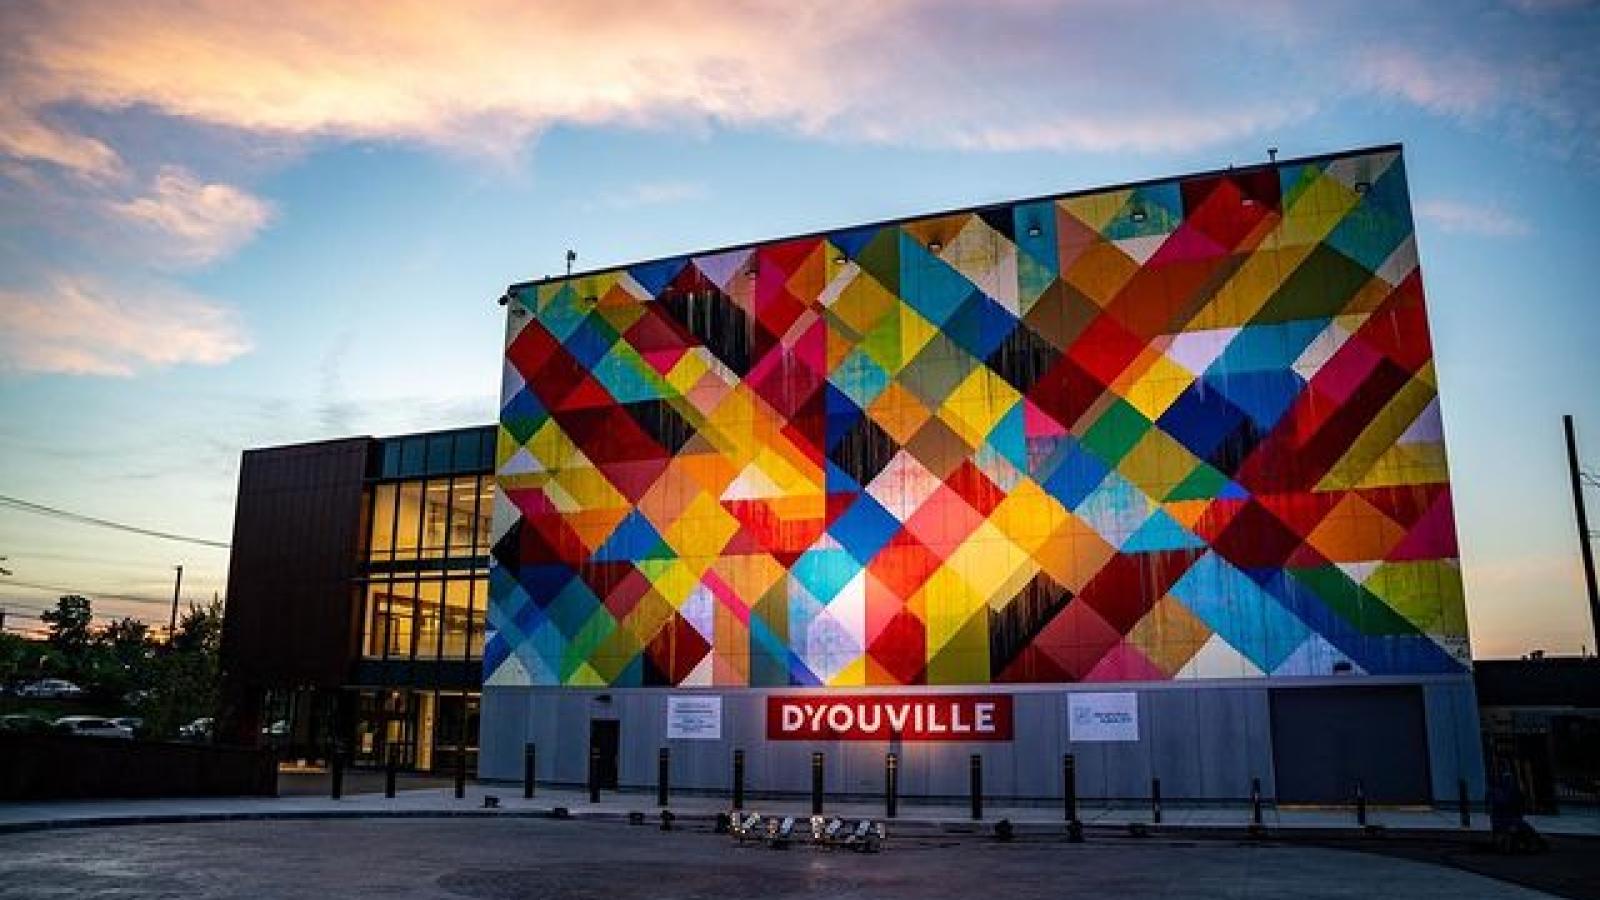 400K Grant to Fund Mental Health Services at D'Youville HUB